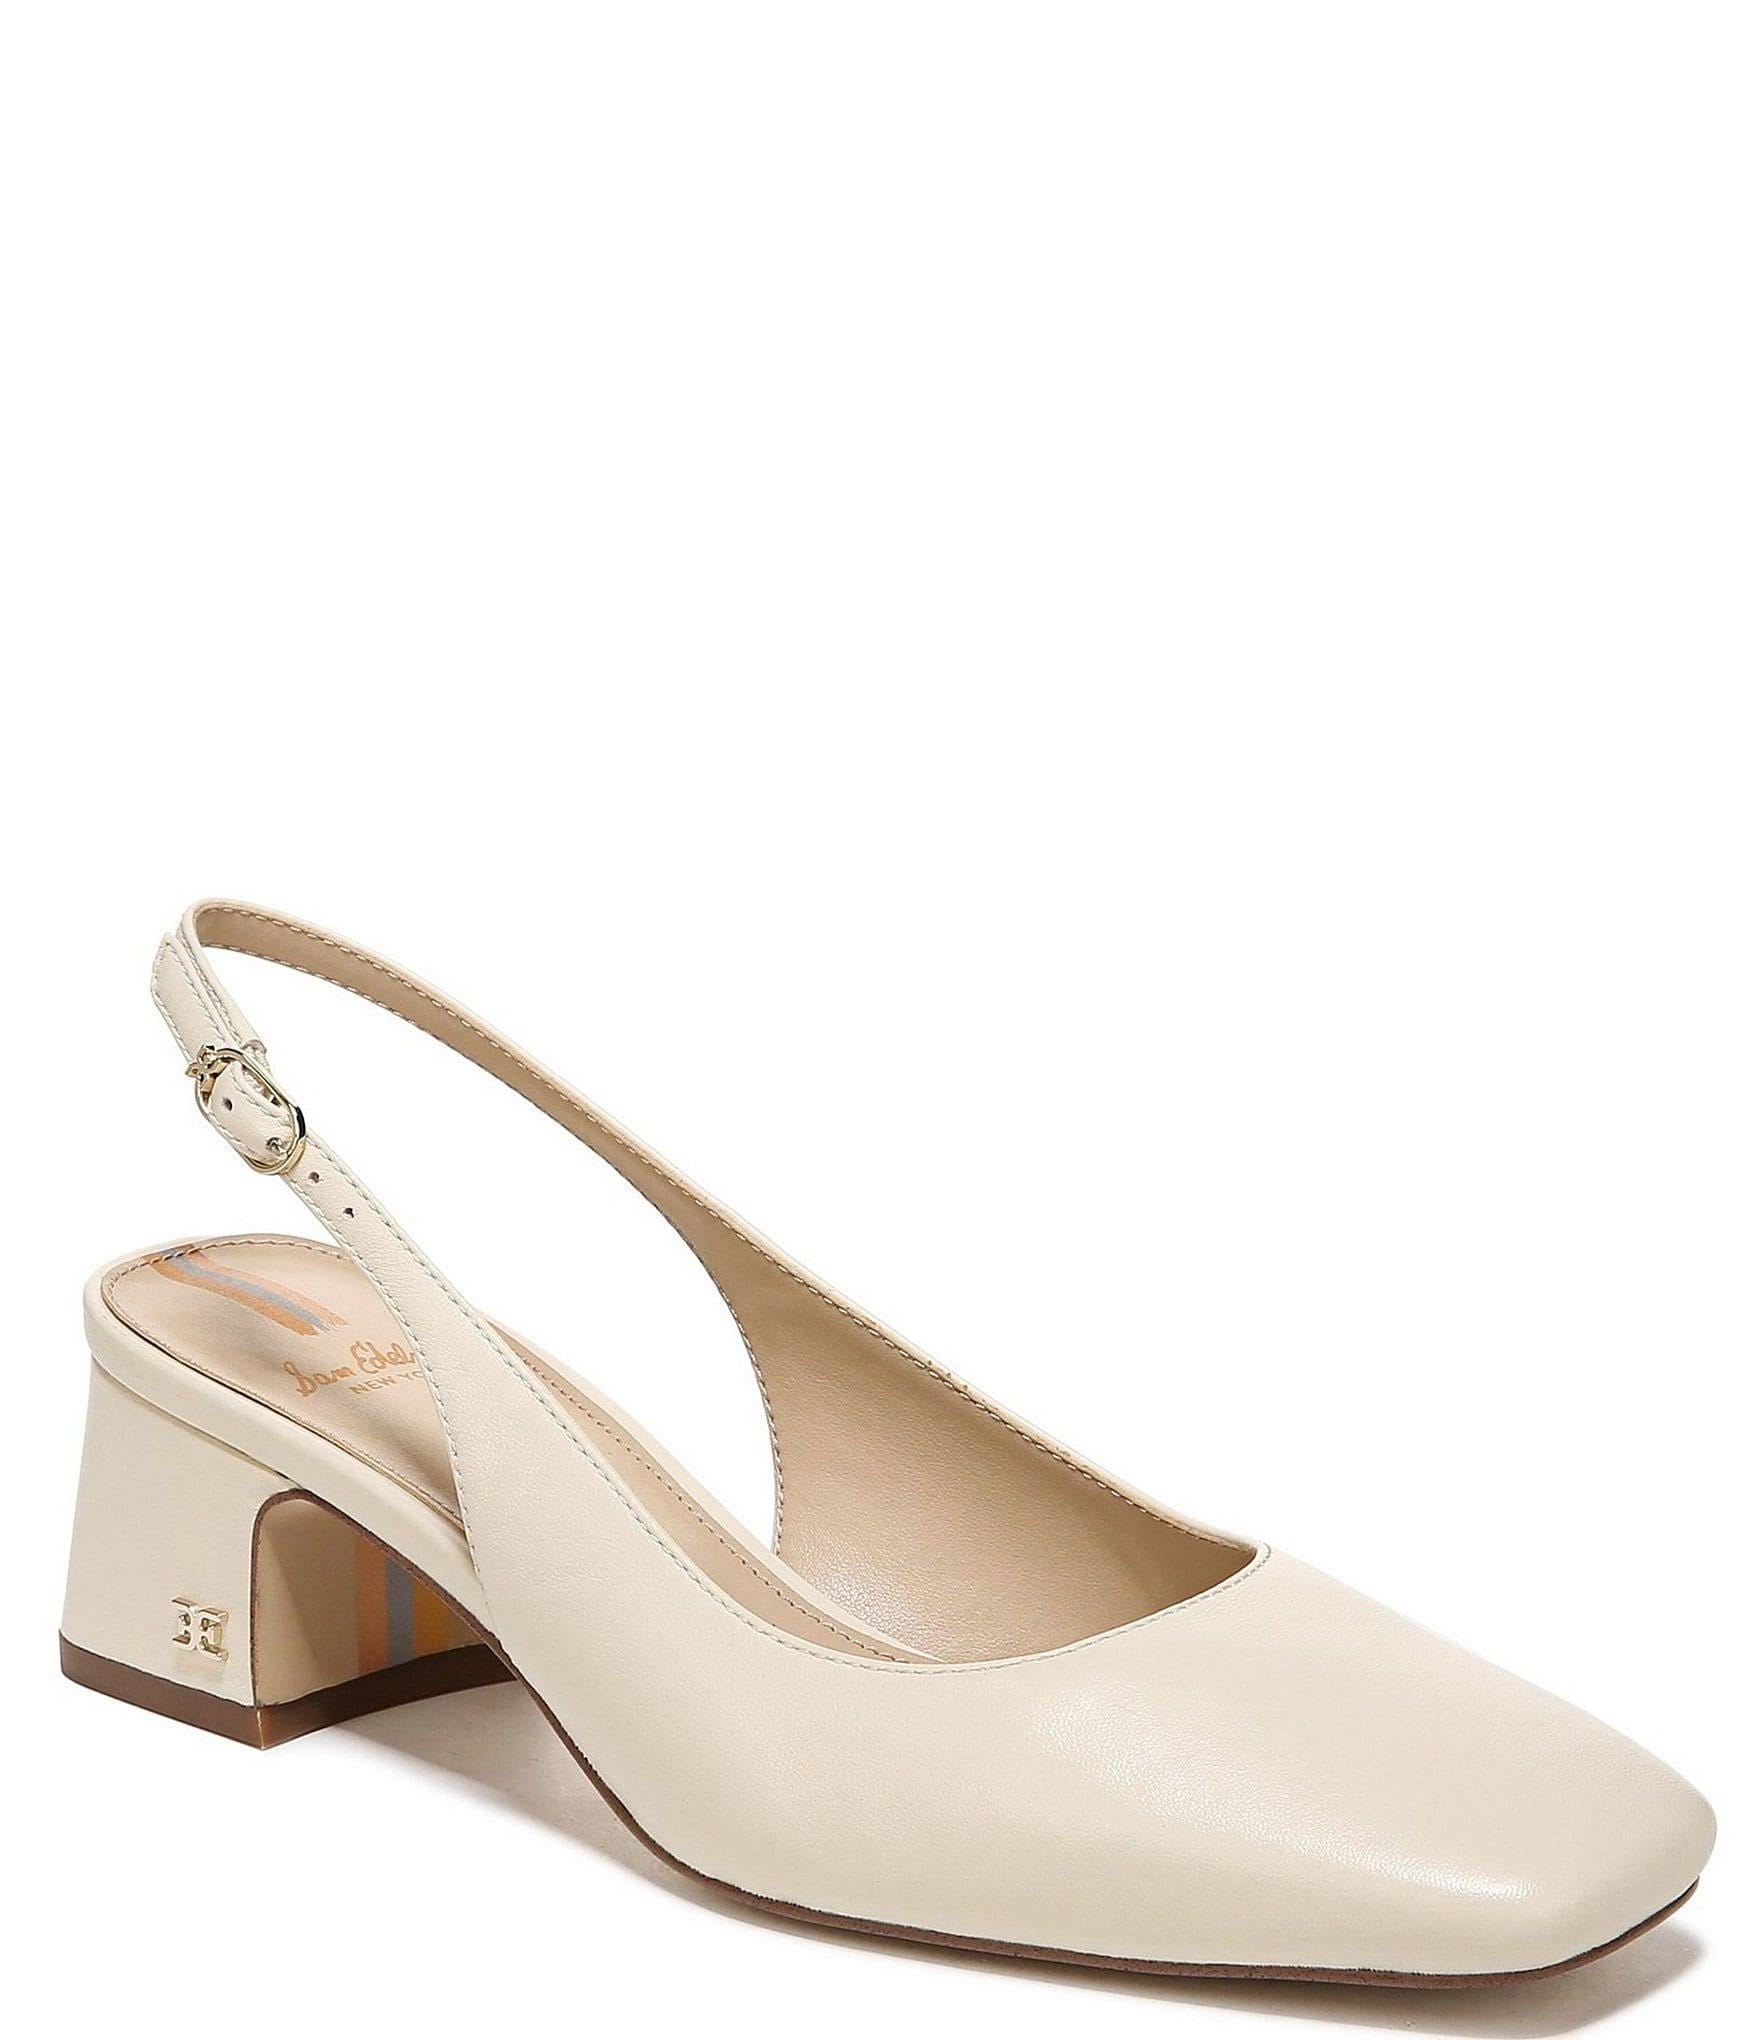 Ivory Slingback Heels: Chic and Comfortable Design | Image